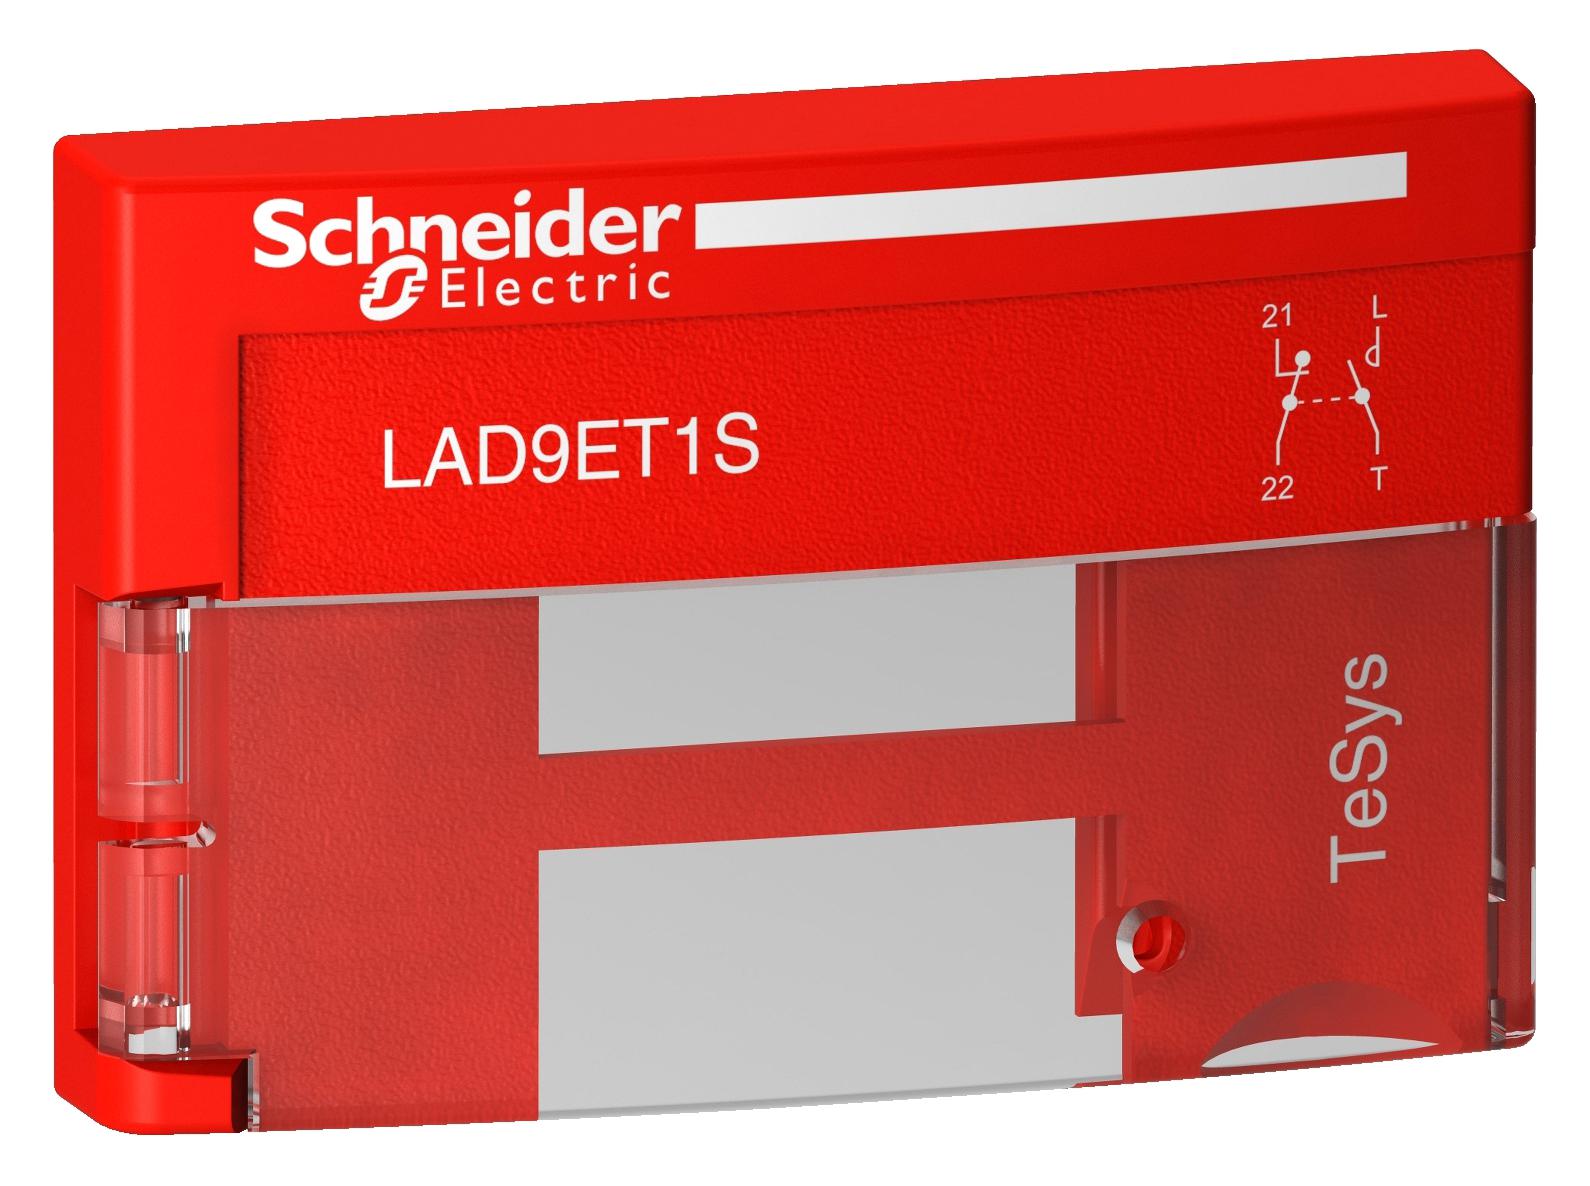 LAD9ET1S SAFETY PROTECTIVE COVER, CONTACTOR/RELAY SCHNEIDER ELECTRIC